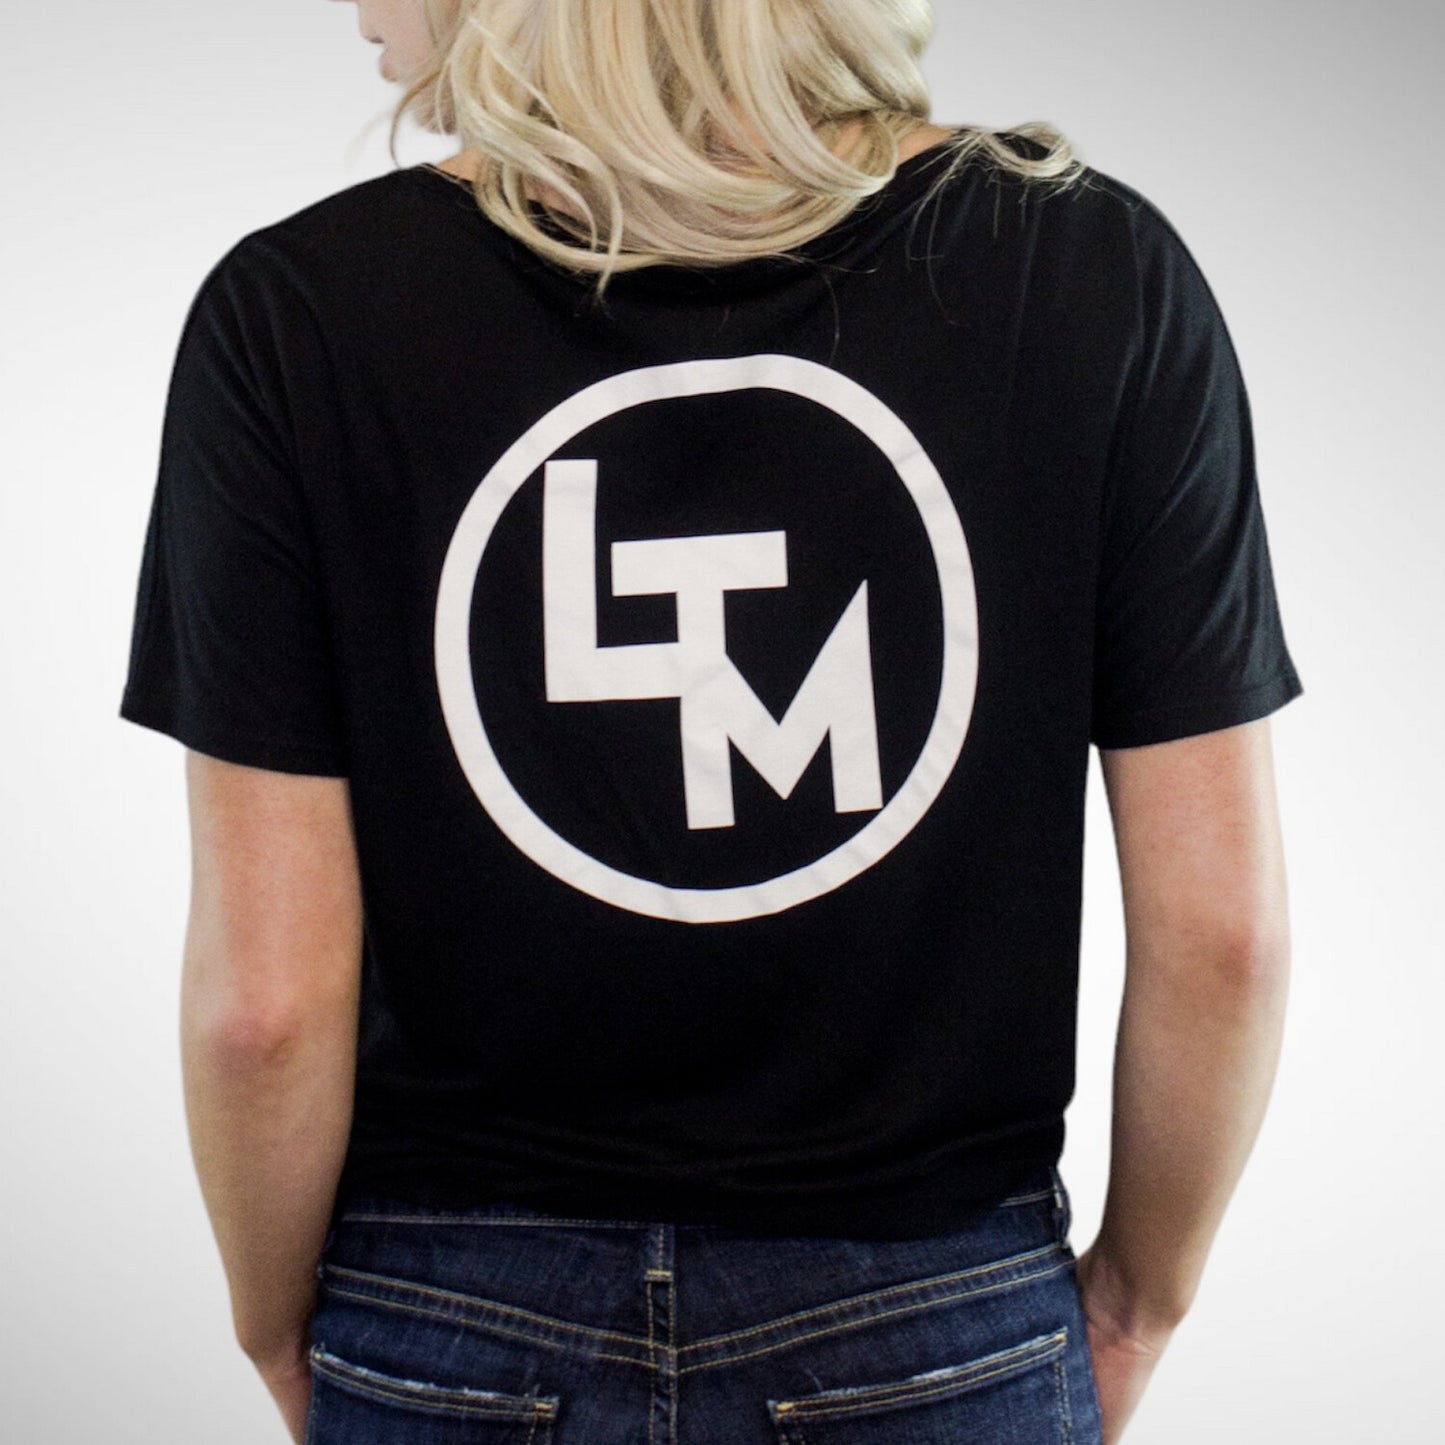 LTM RELAXED FIT V-NECK TEE